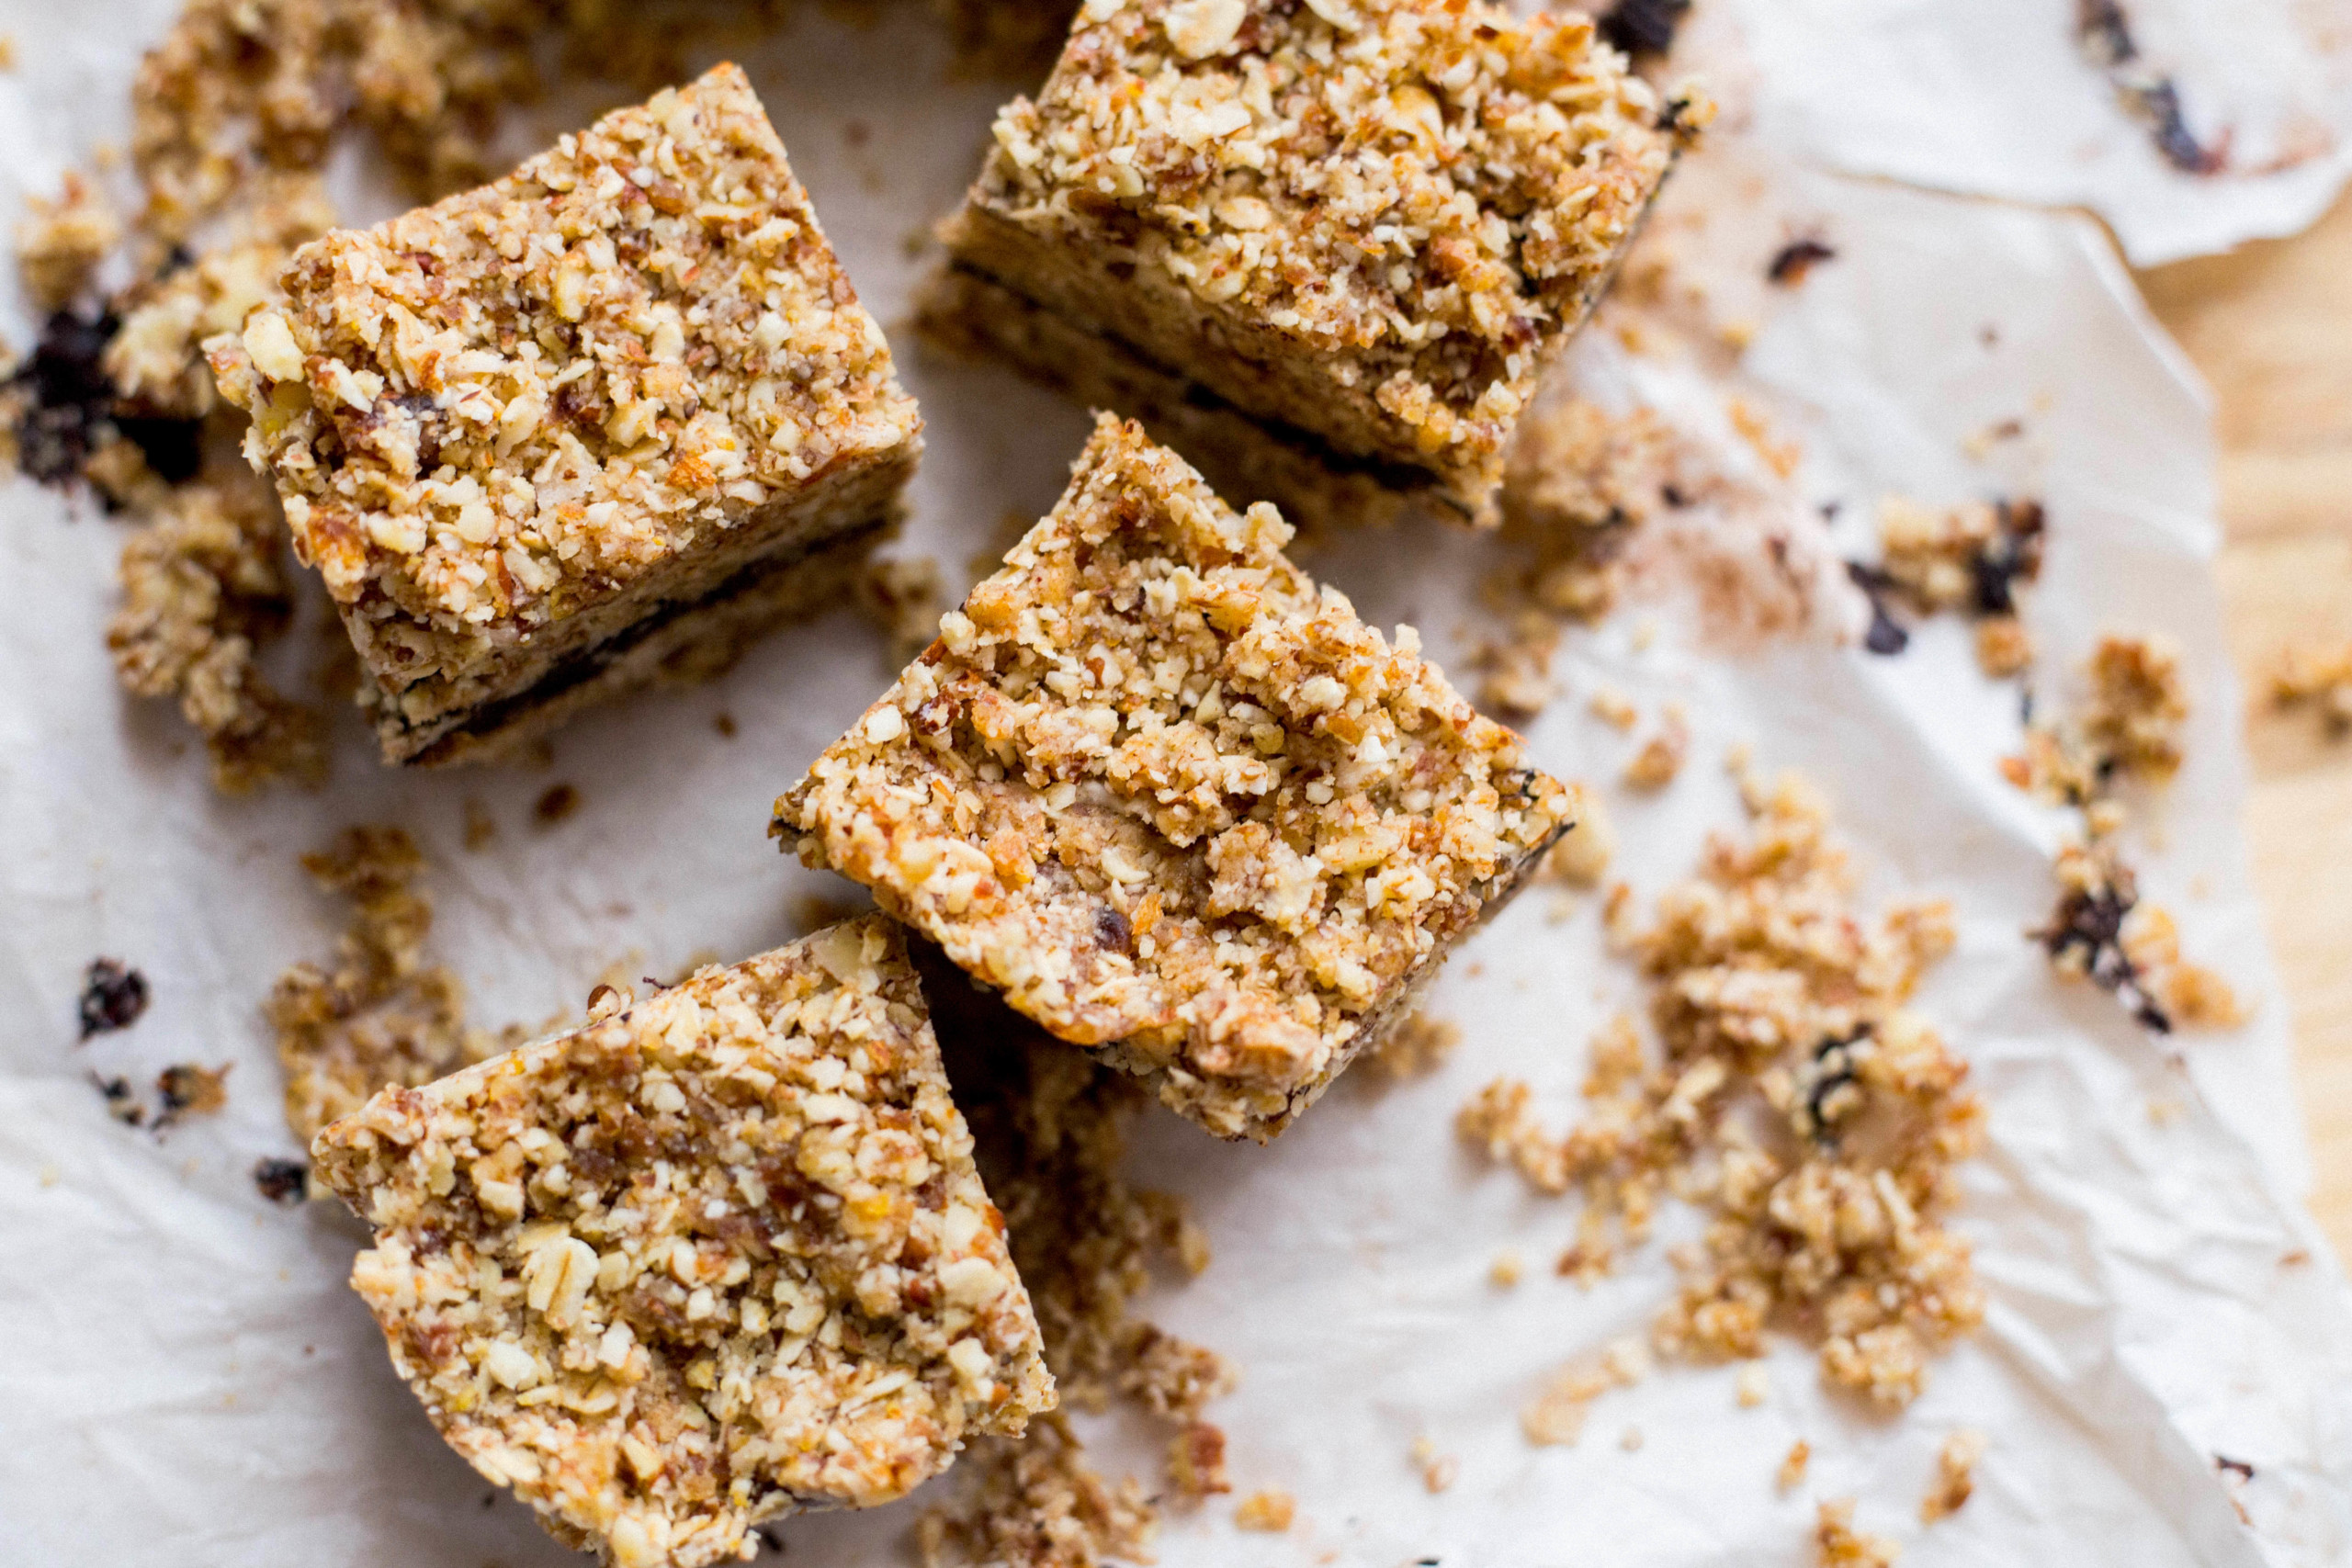 4 Oat and Date Bars on baking paper